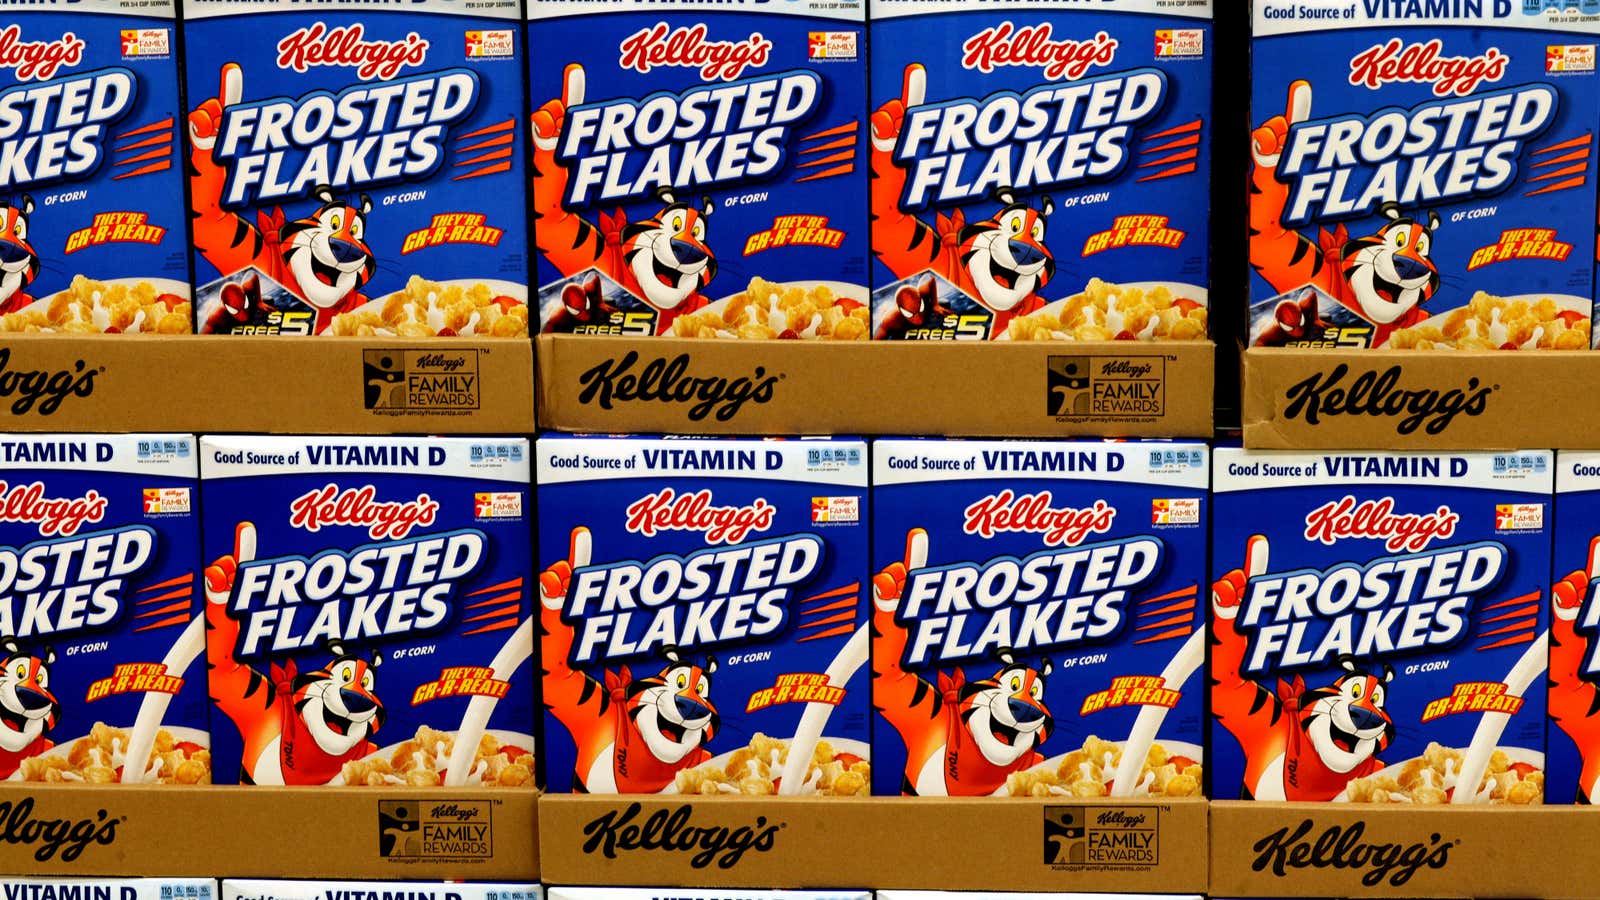 Kellogg’s is partnering with top chefs to learn what people want for breakfast.